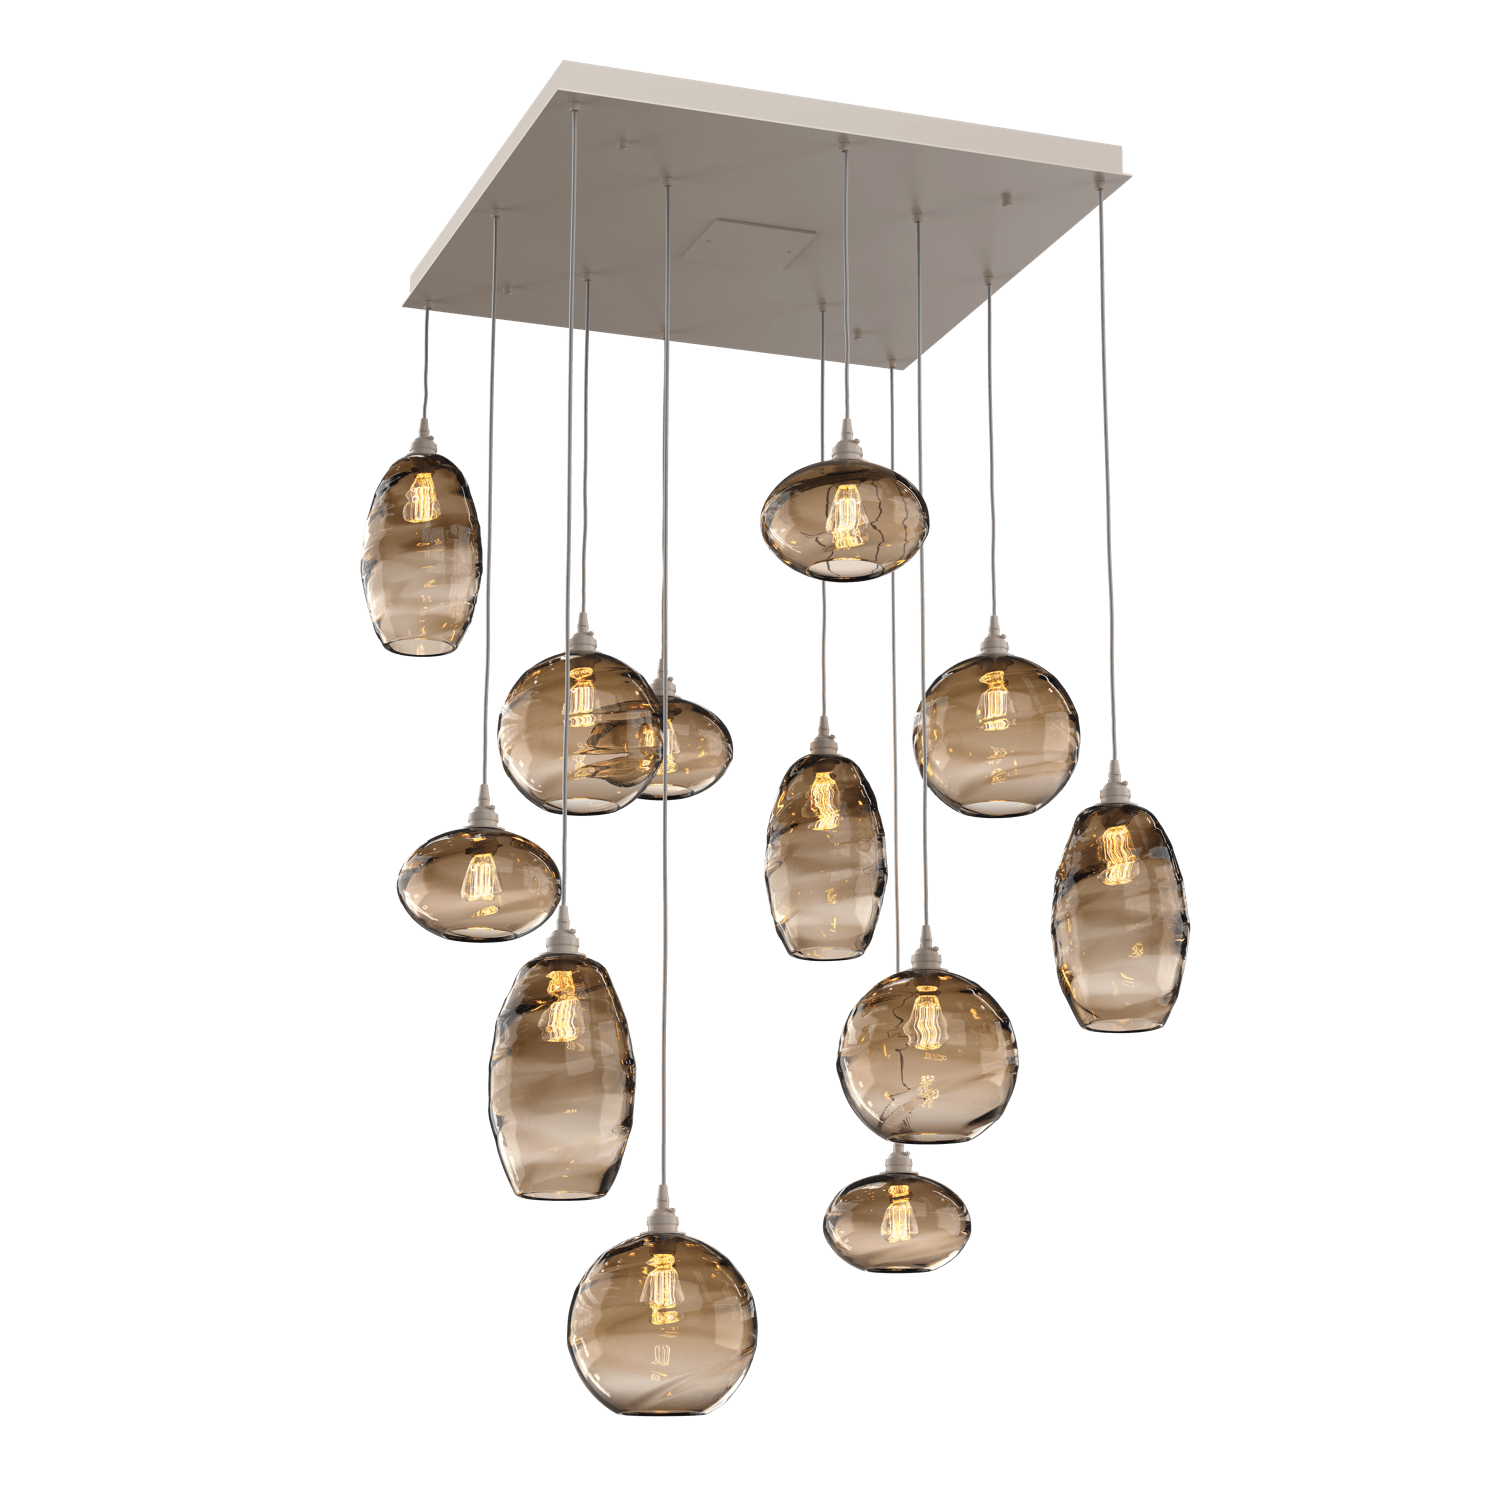 CHB0048-12-BS-OB-Hammerton-Studio-Optic-Blown-Glass-Misto-12-light-square-pendant-chandelier-with-metallic-beige-silver-finish-and-optic-bronze-blown-glass-shades-and-incandescent-lamping